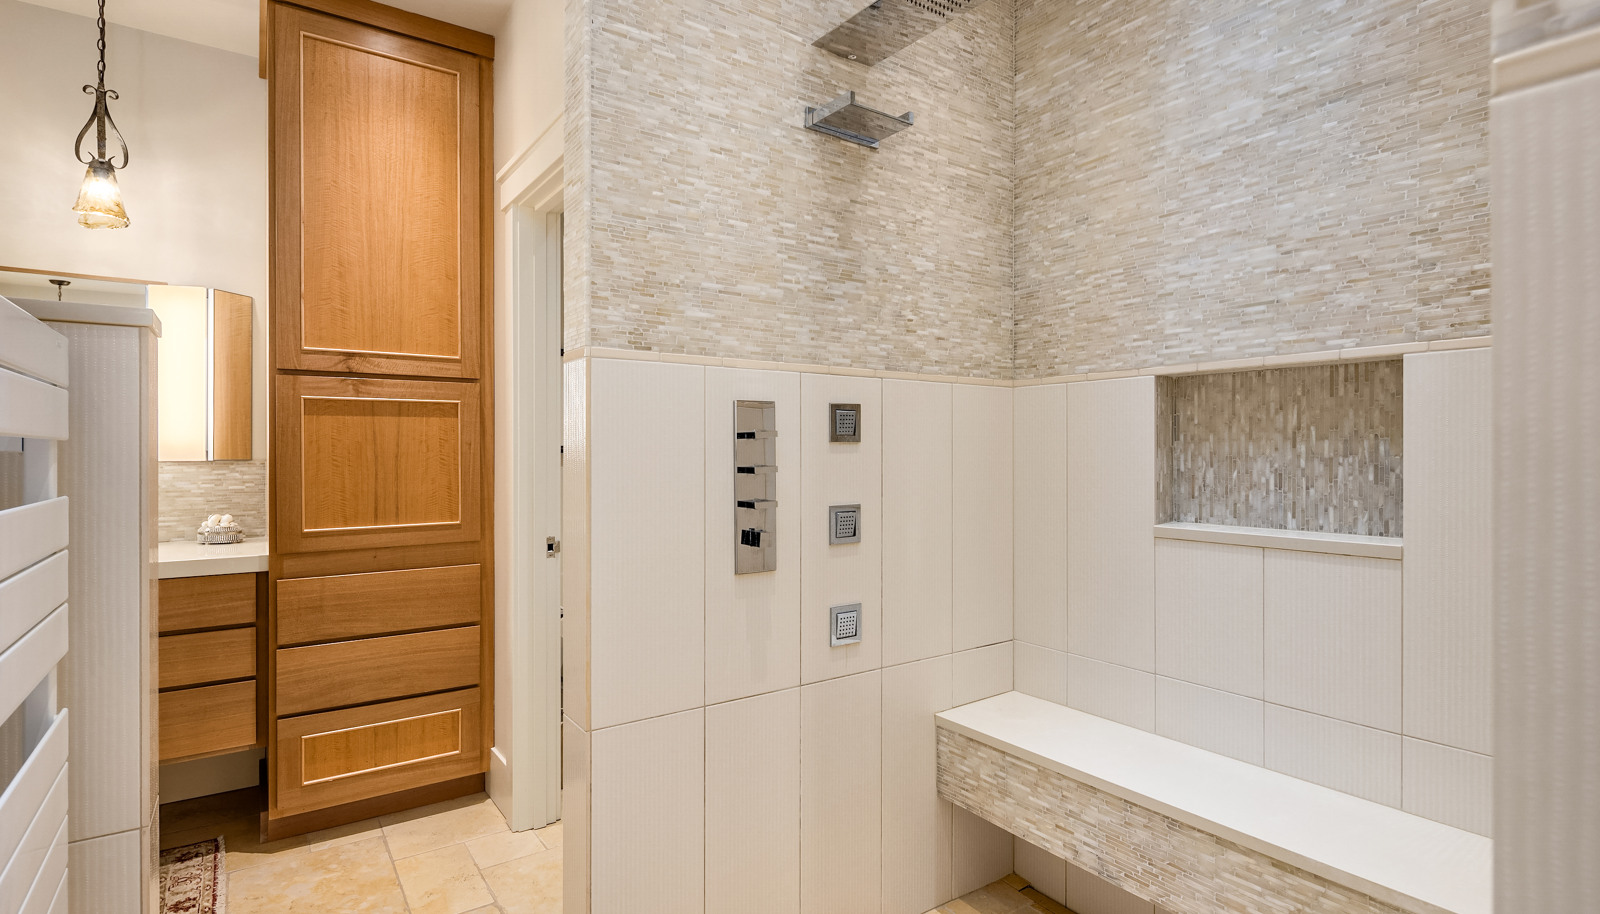 The tiled, walk-in shower. The suite offers an enormous walk-in closet with built-ins, a purse closet and shoe closet, all with cedar lining accents. 